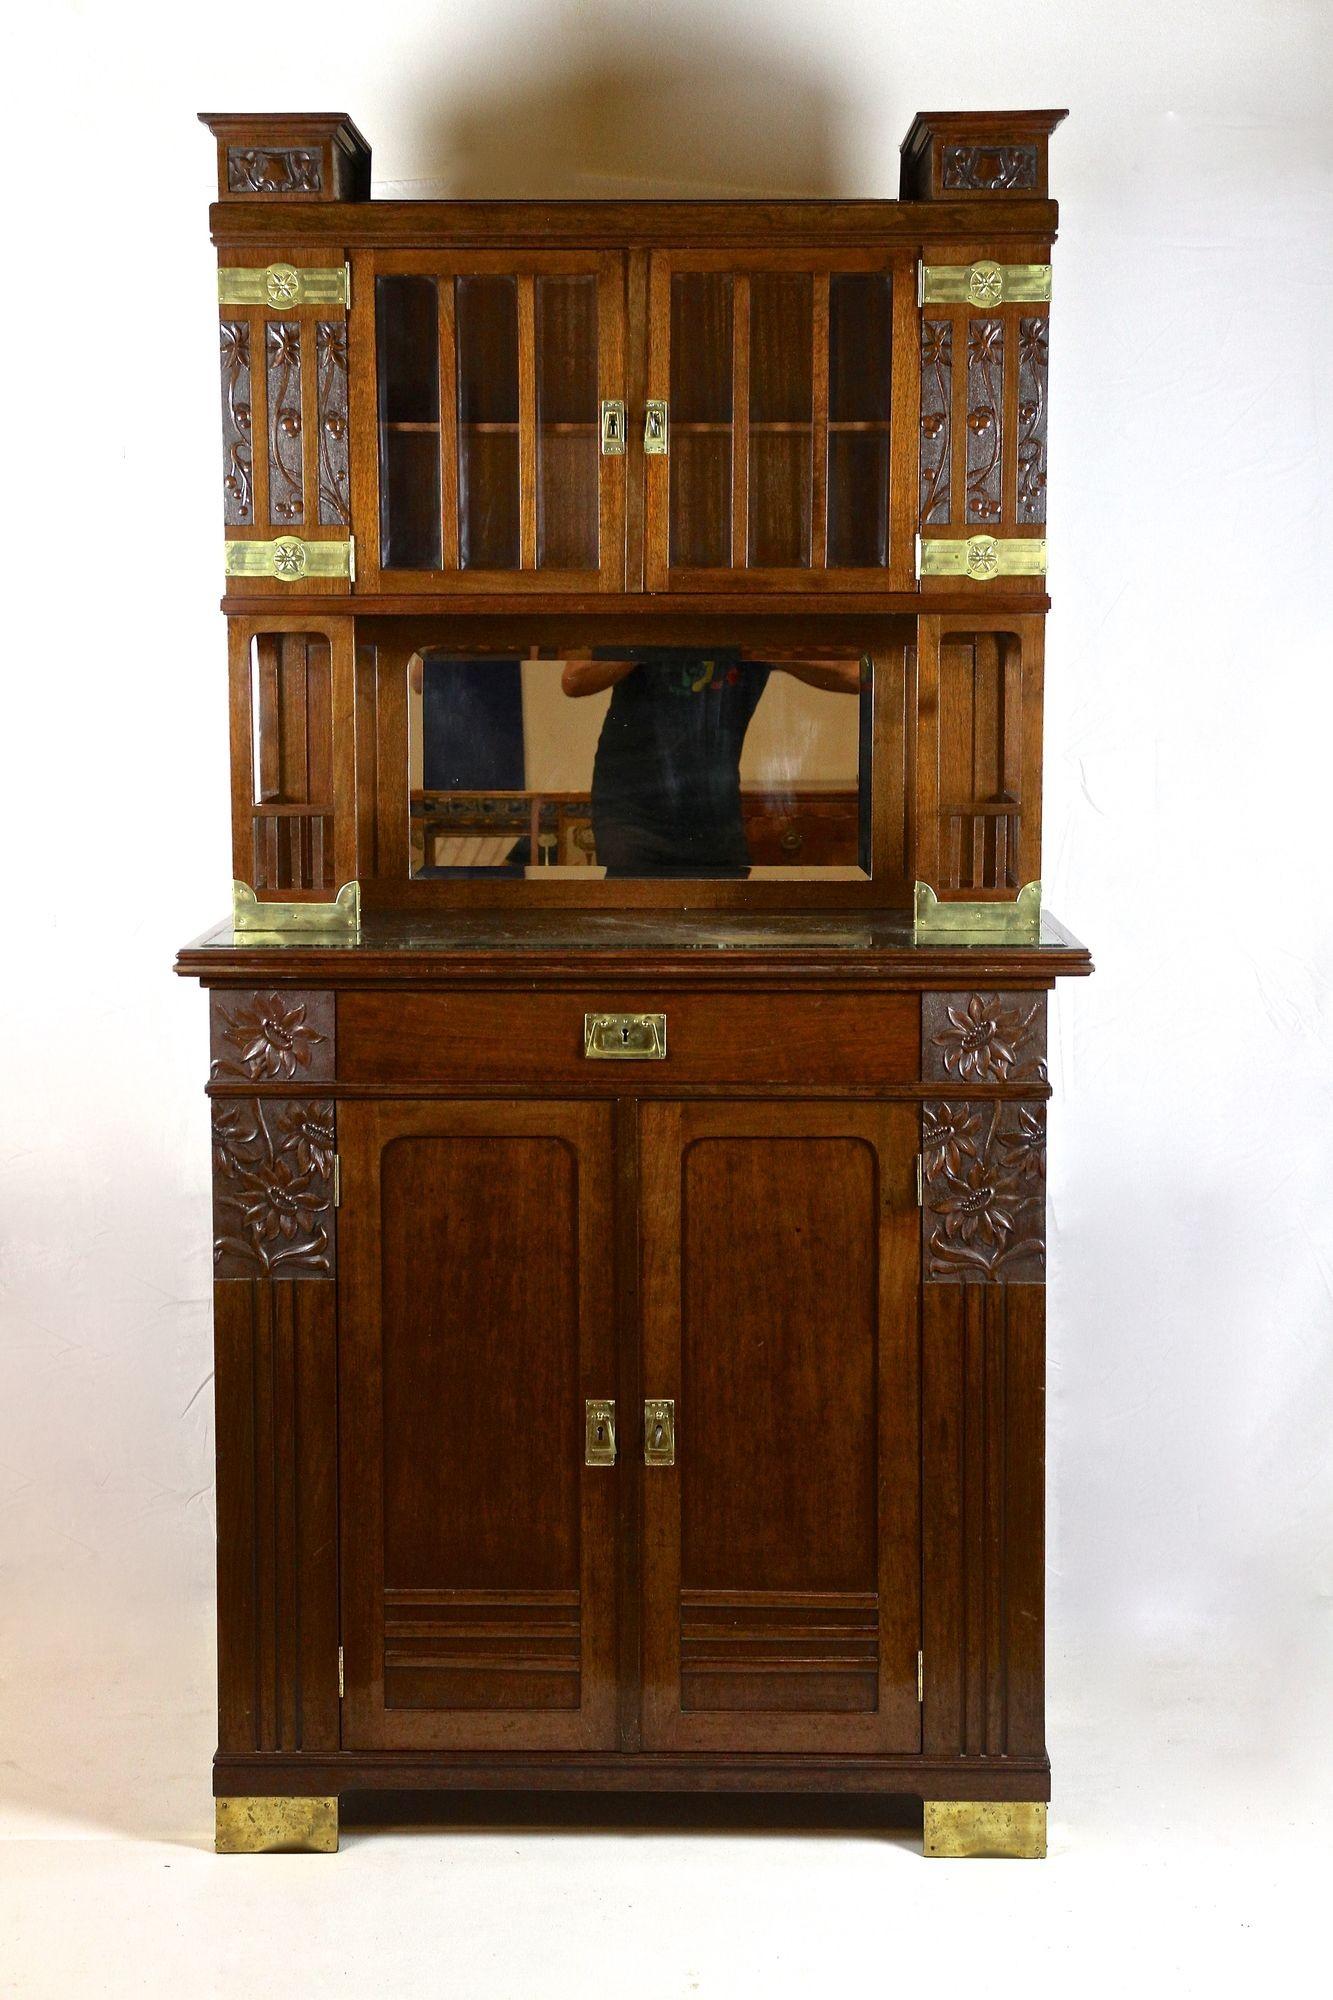 Remarkable Art Nouveau mahogany buffet cabinet from the period around 1910 in Austria. Consisting of two parts, this 20th century architectural cabinet impresses with its amazing details and straight shaped design. The lower part with the still